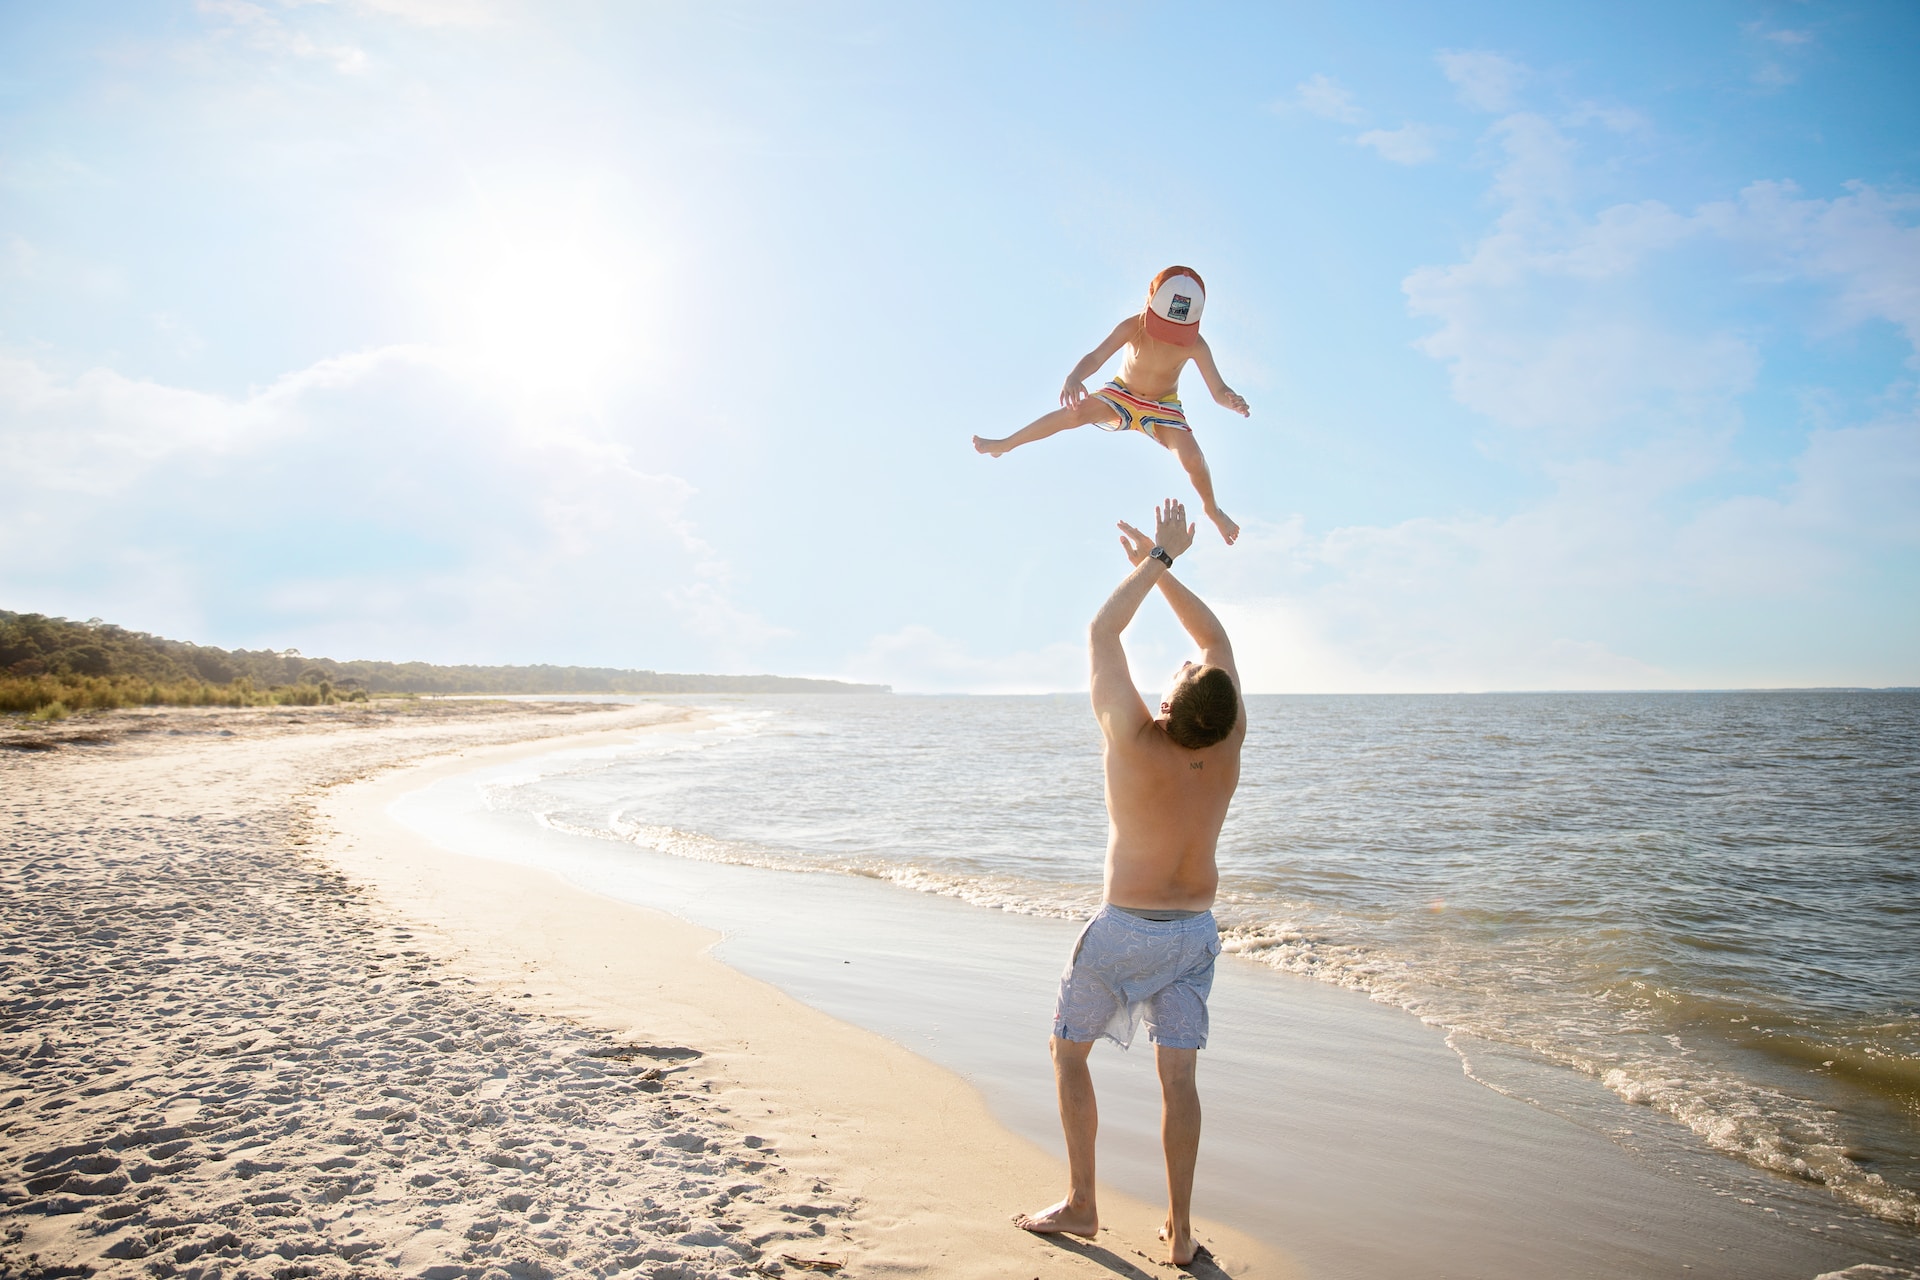 A dad tossing his son into the air at the beach.